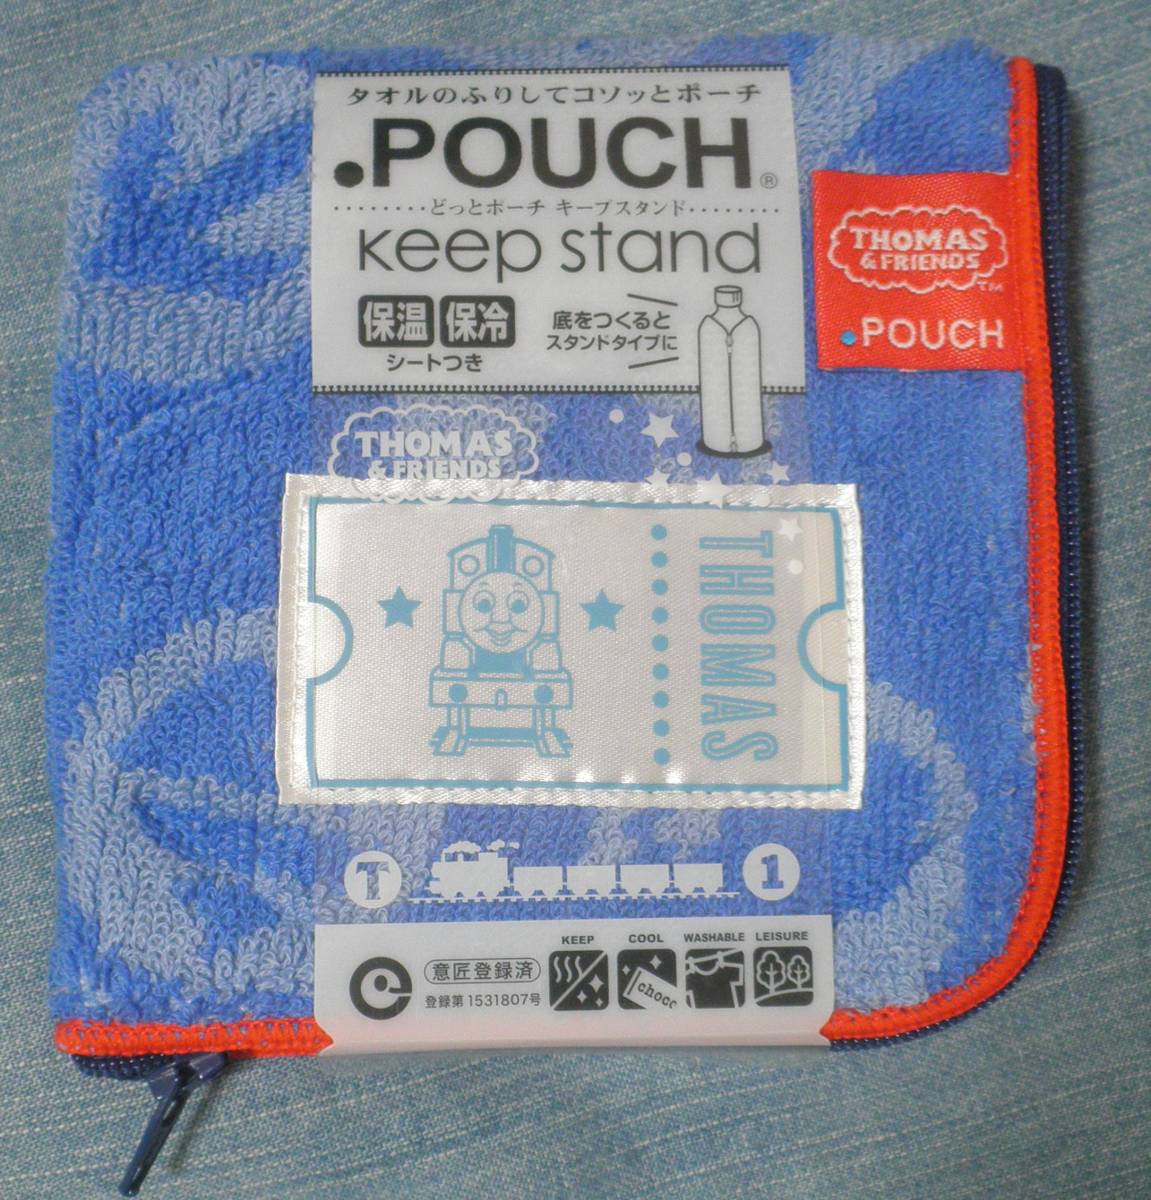 .POUCH どっとポーチ　トーマス_画像1